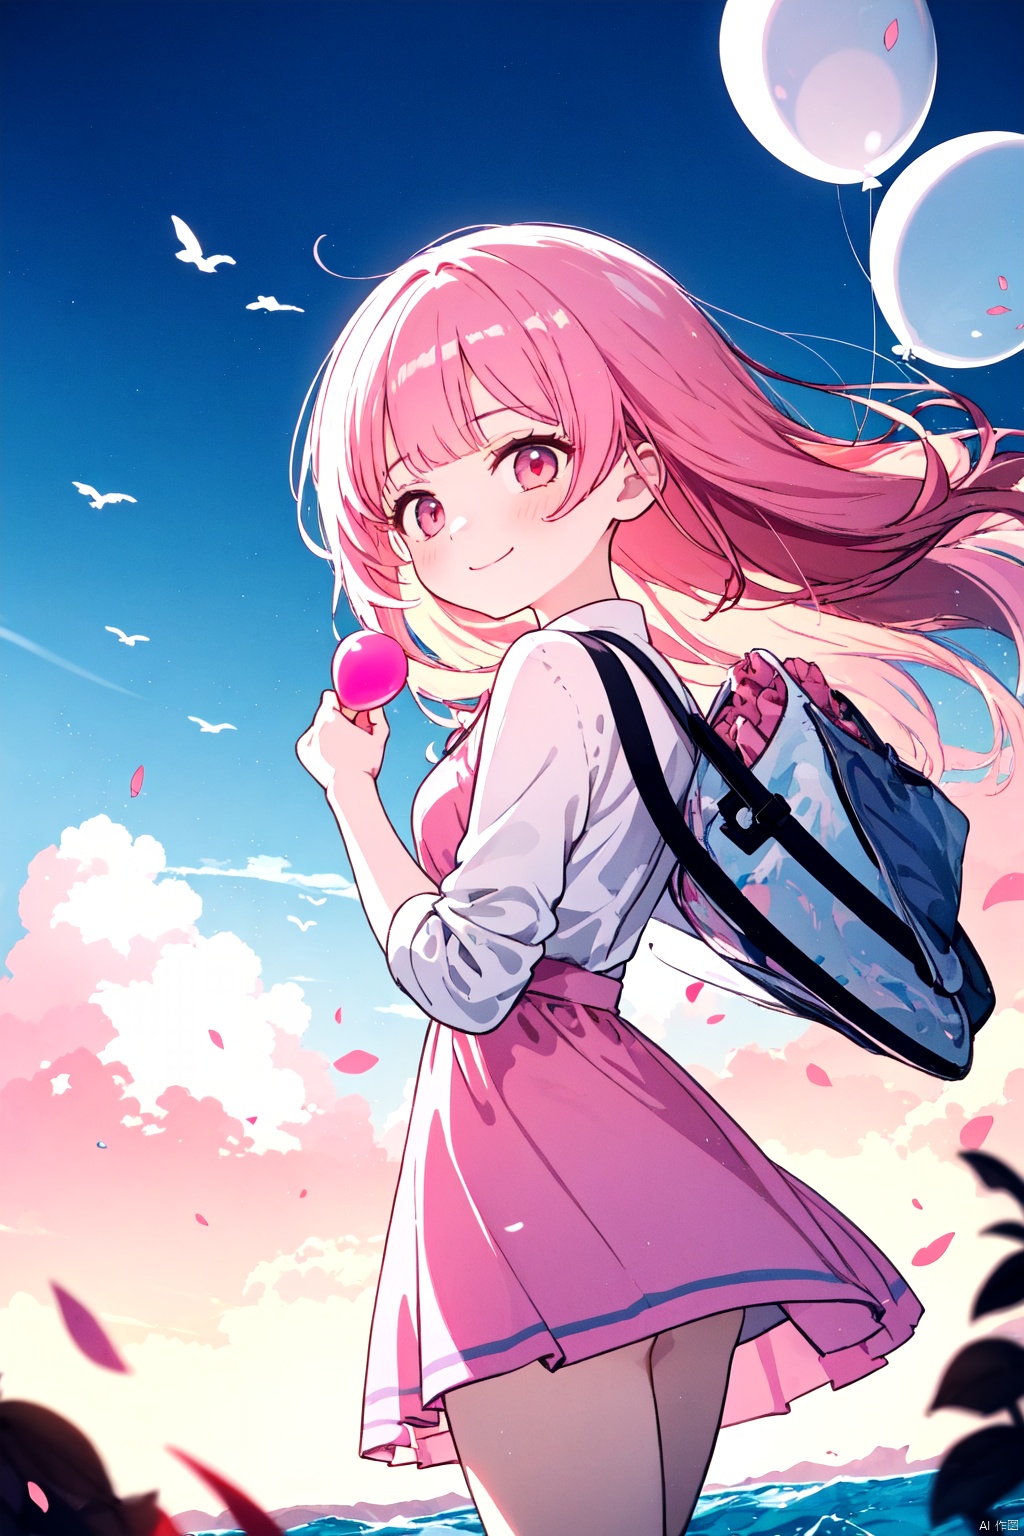 A girl in a pink dress, with pink hair flowing in the wind, holding a pink balloon, standing amidst a sea of pink clouds. Her hair cascades down her back, and she wears a gentle smile. The background features pink clouds with a gradient of colors, creating a soft and tender atmosphere. The scene is depicted with HDR, ultra-fine painting quality, and sharp focus. The art style combines portraits and dreamy landscapes, emphasizing the girl's serene presence in the sky. The lighting should enhance the dreamlike quality of the scene, casting a soft glow over the entire composition.